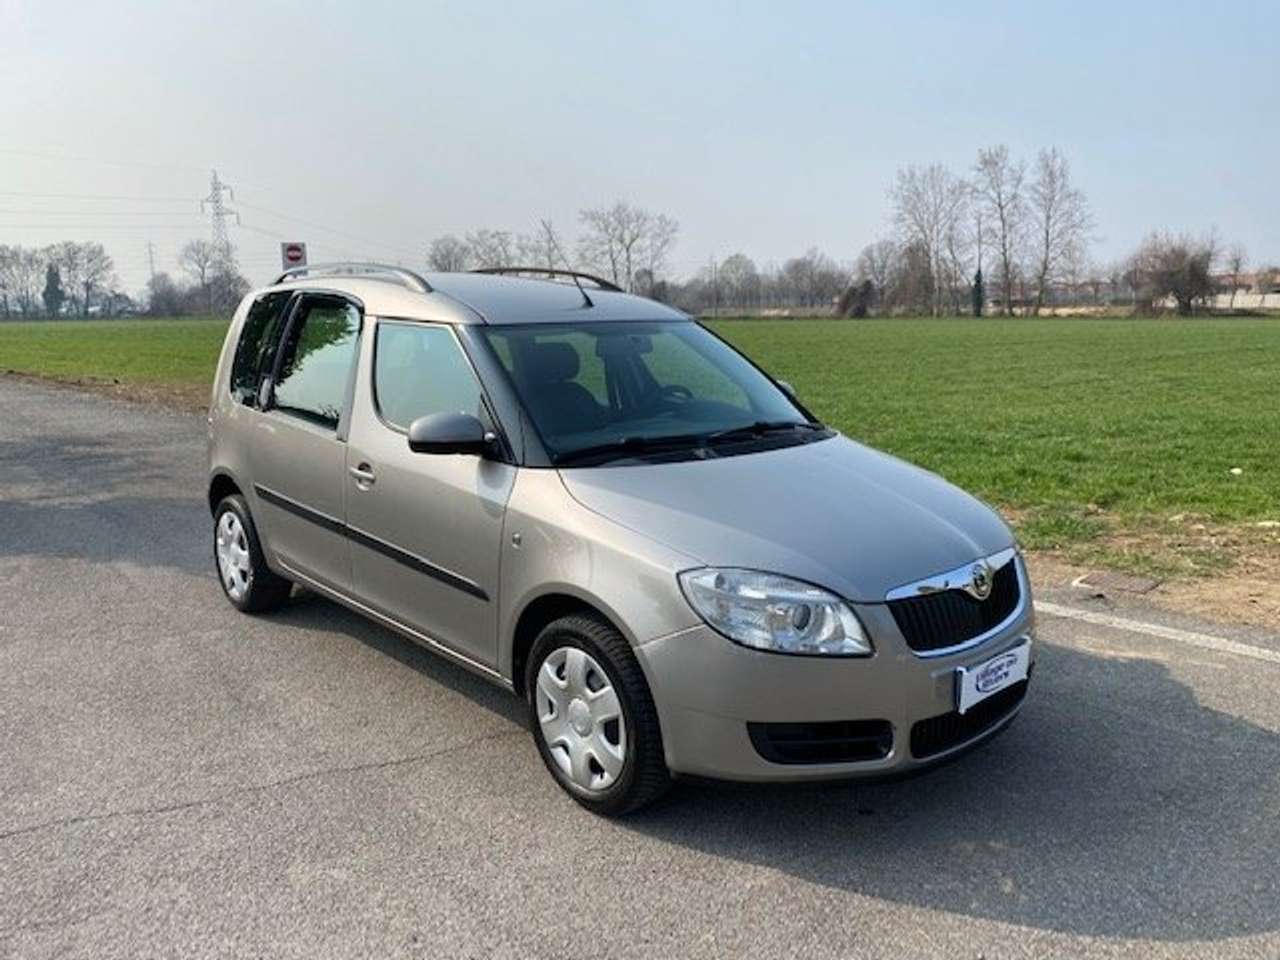 Skoda Roomster Roomster 1.2 Ambition (style) 70cv NEOPATENTATI